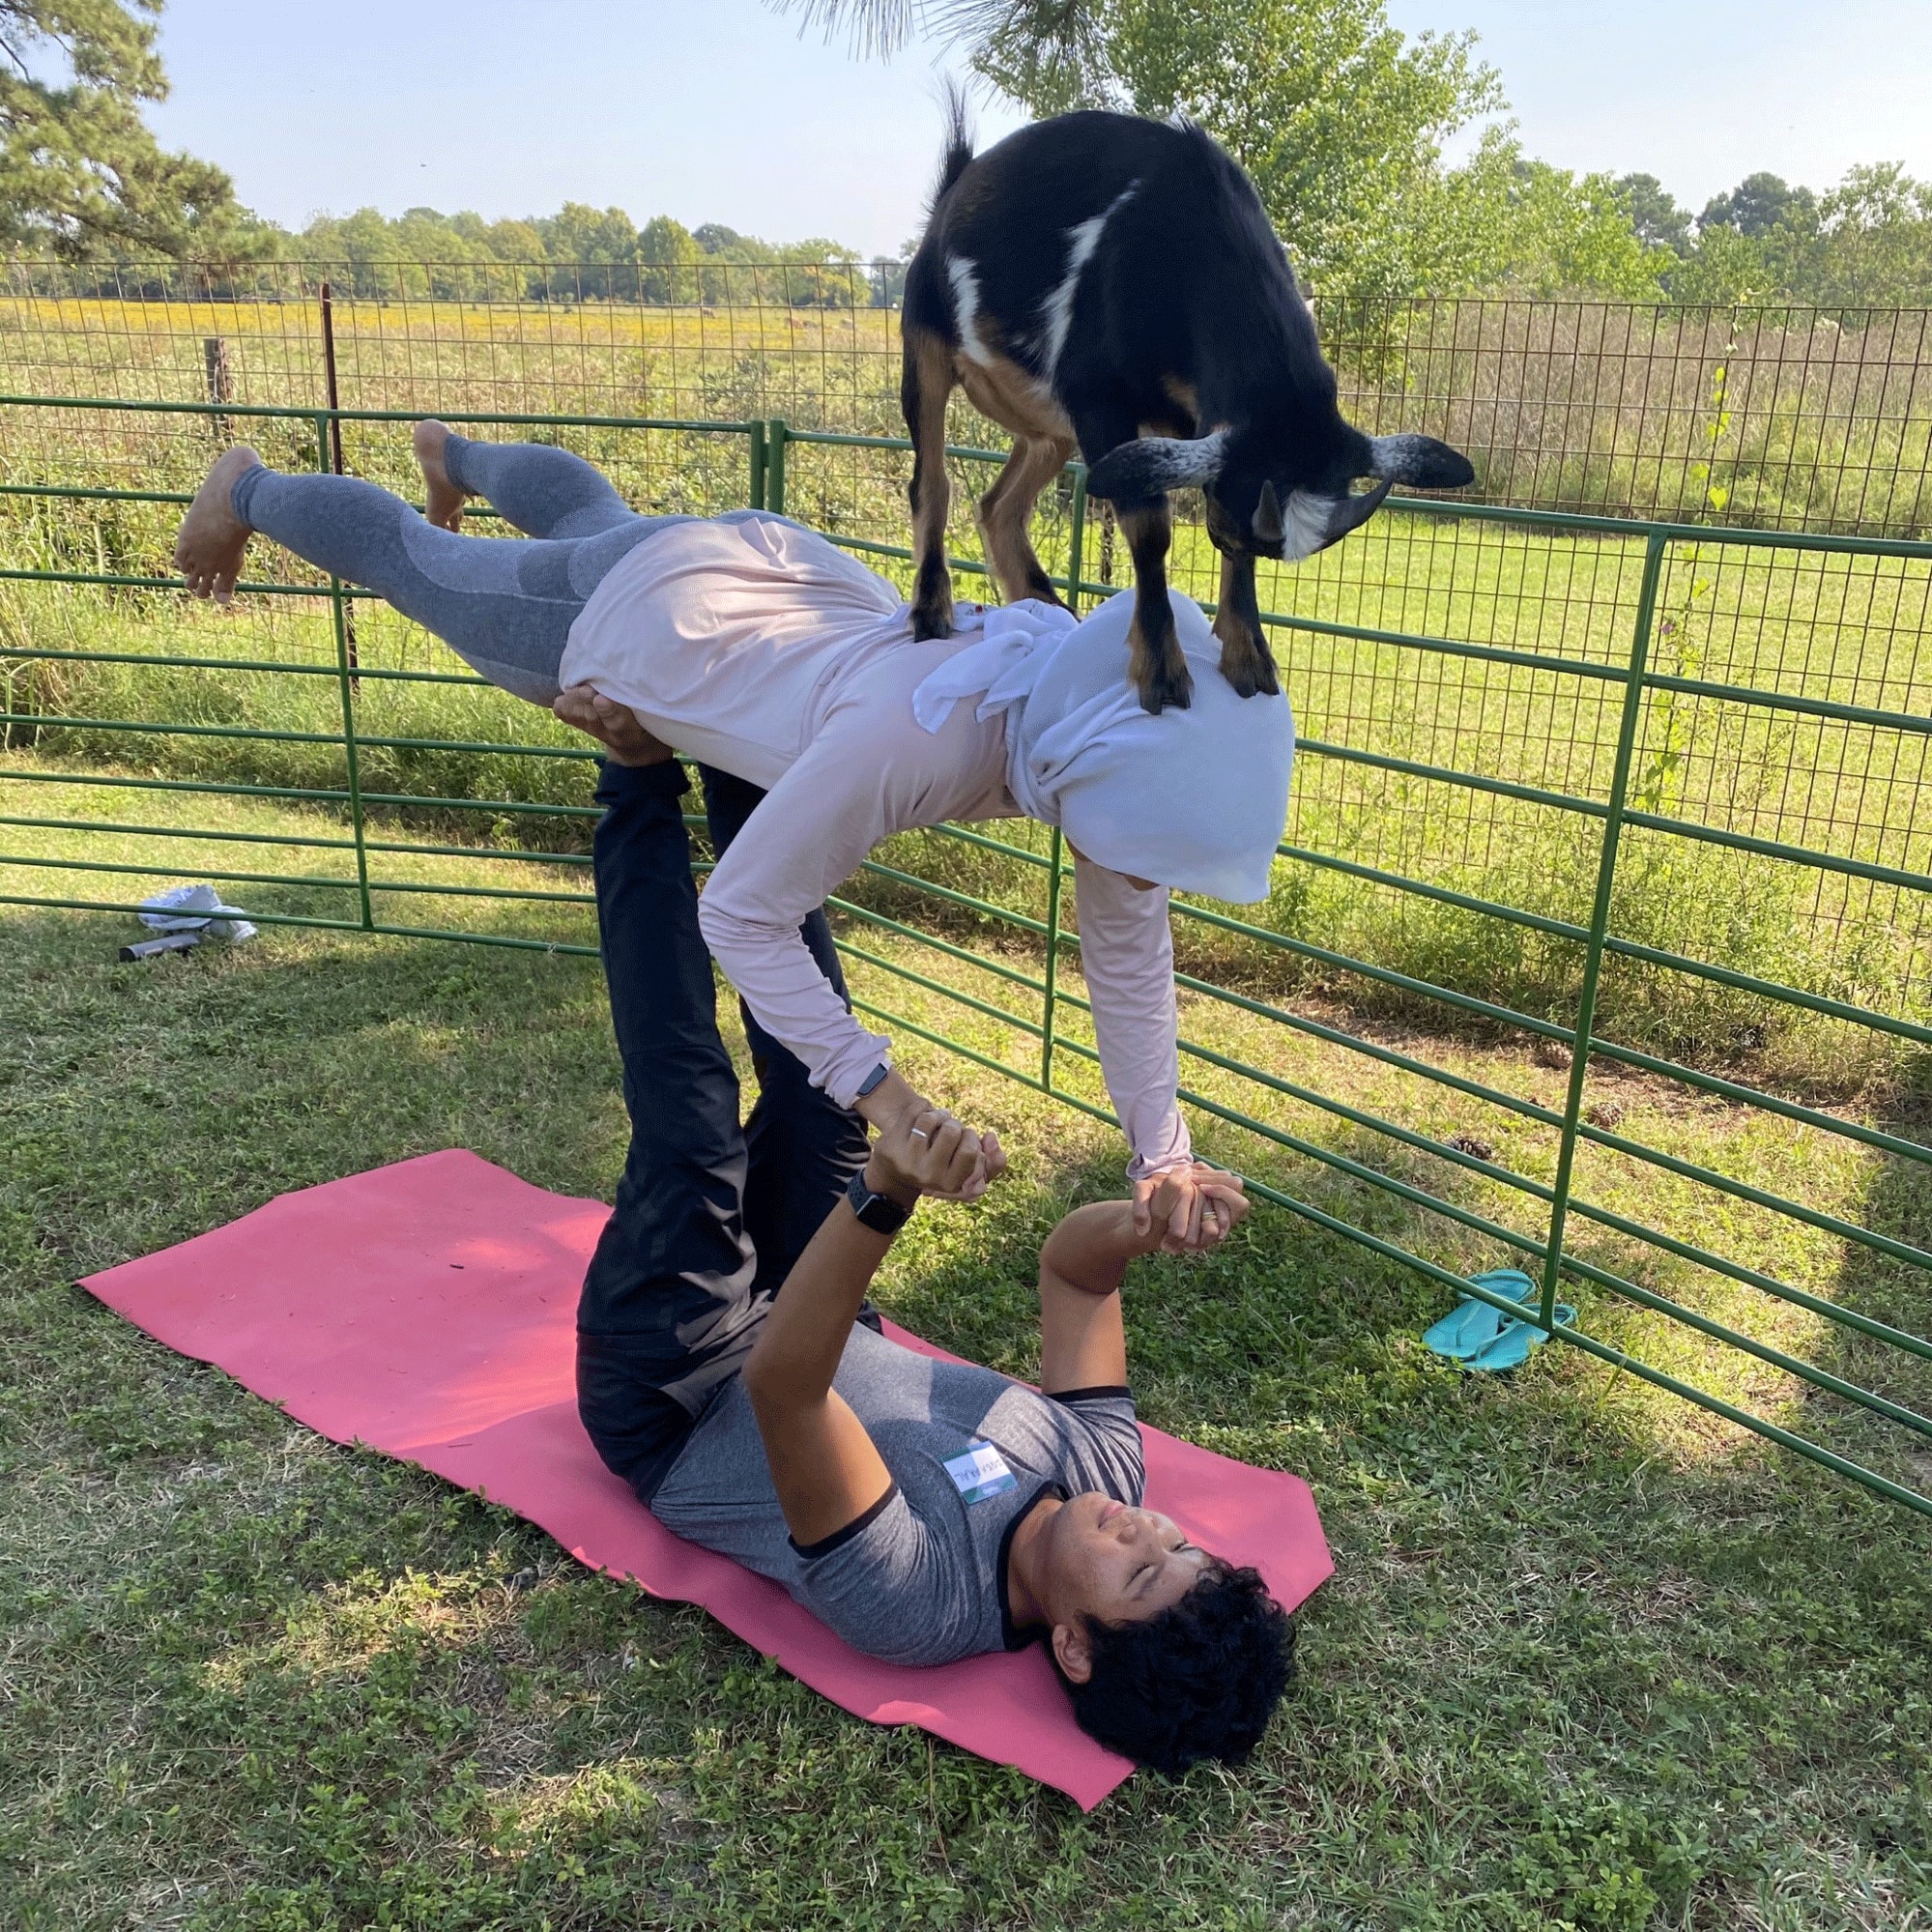 Yoga with goats craze: 4 other animals to namaste with, Health News -  AsiaOne